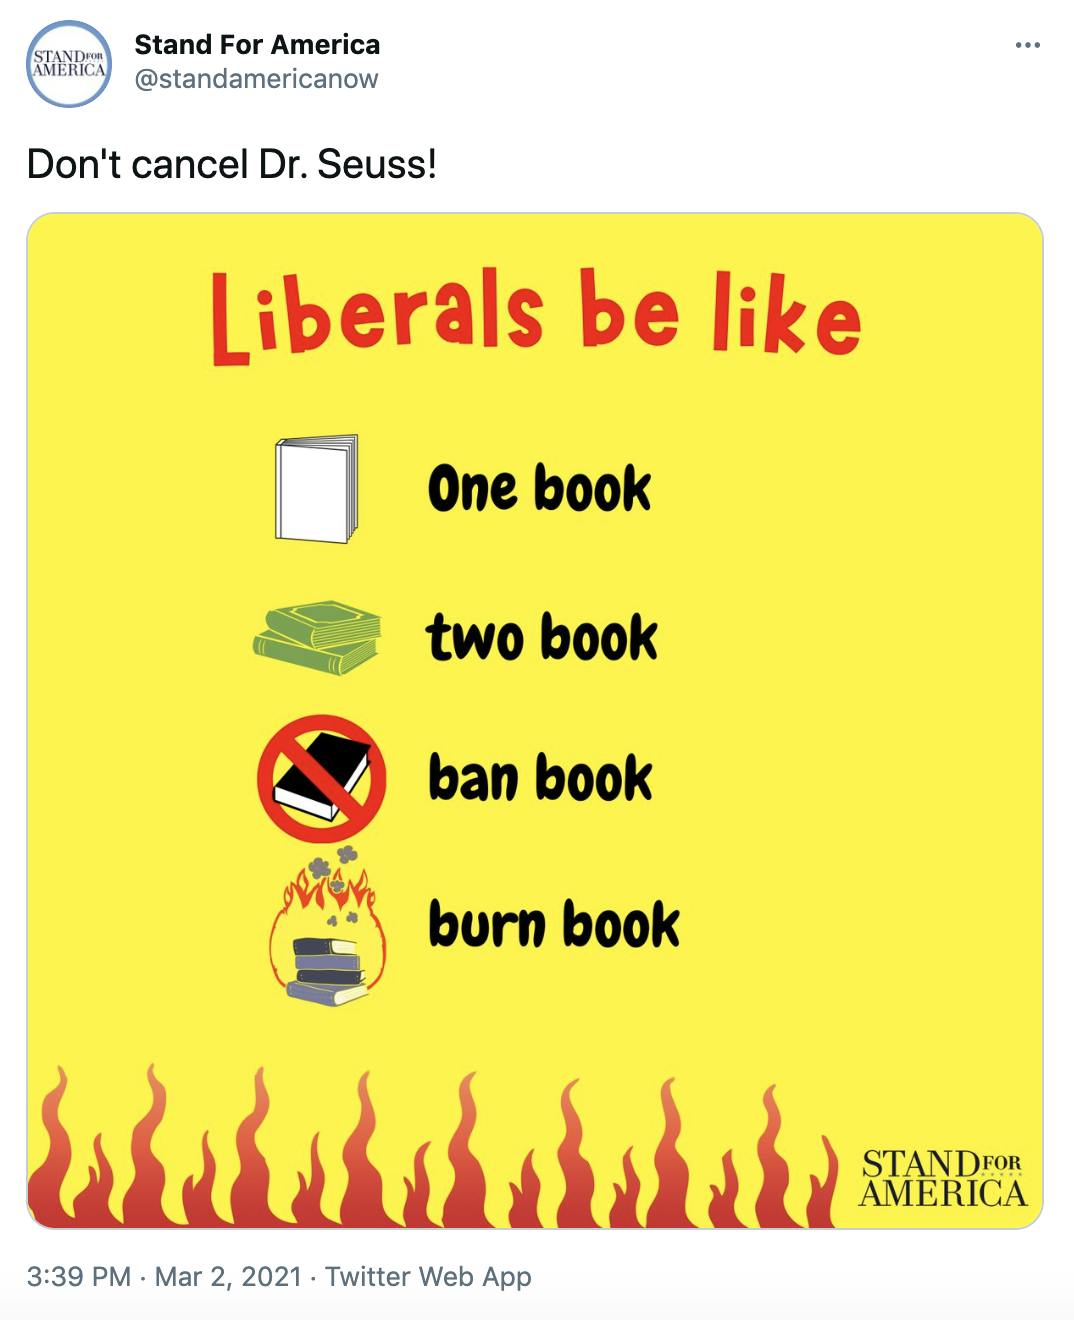 'Don't cancel Dr. Seuss!' yellow graphic with the text 'one book, two book, ban book, burn book'